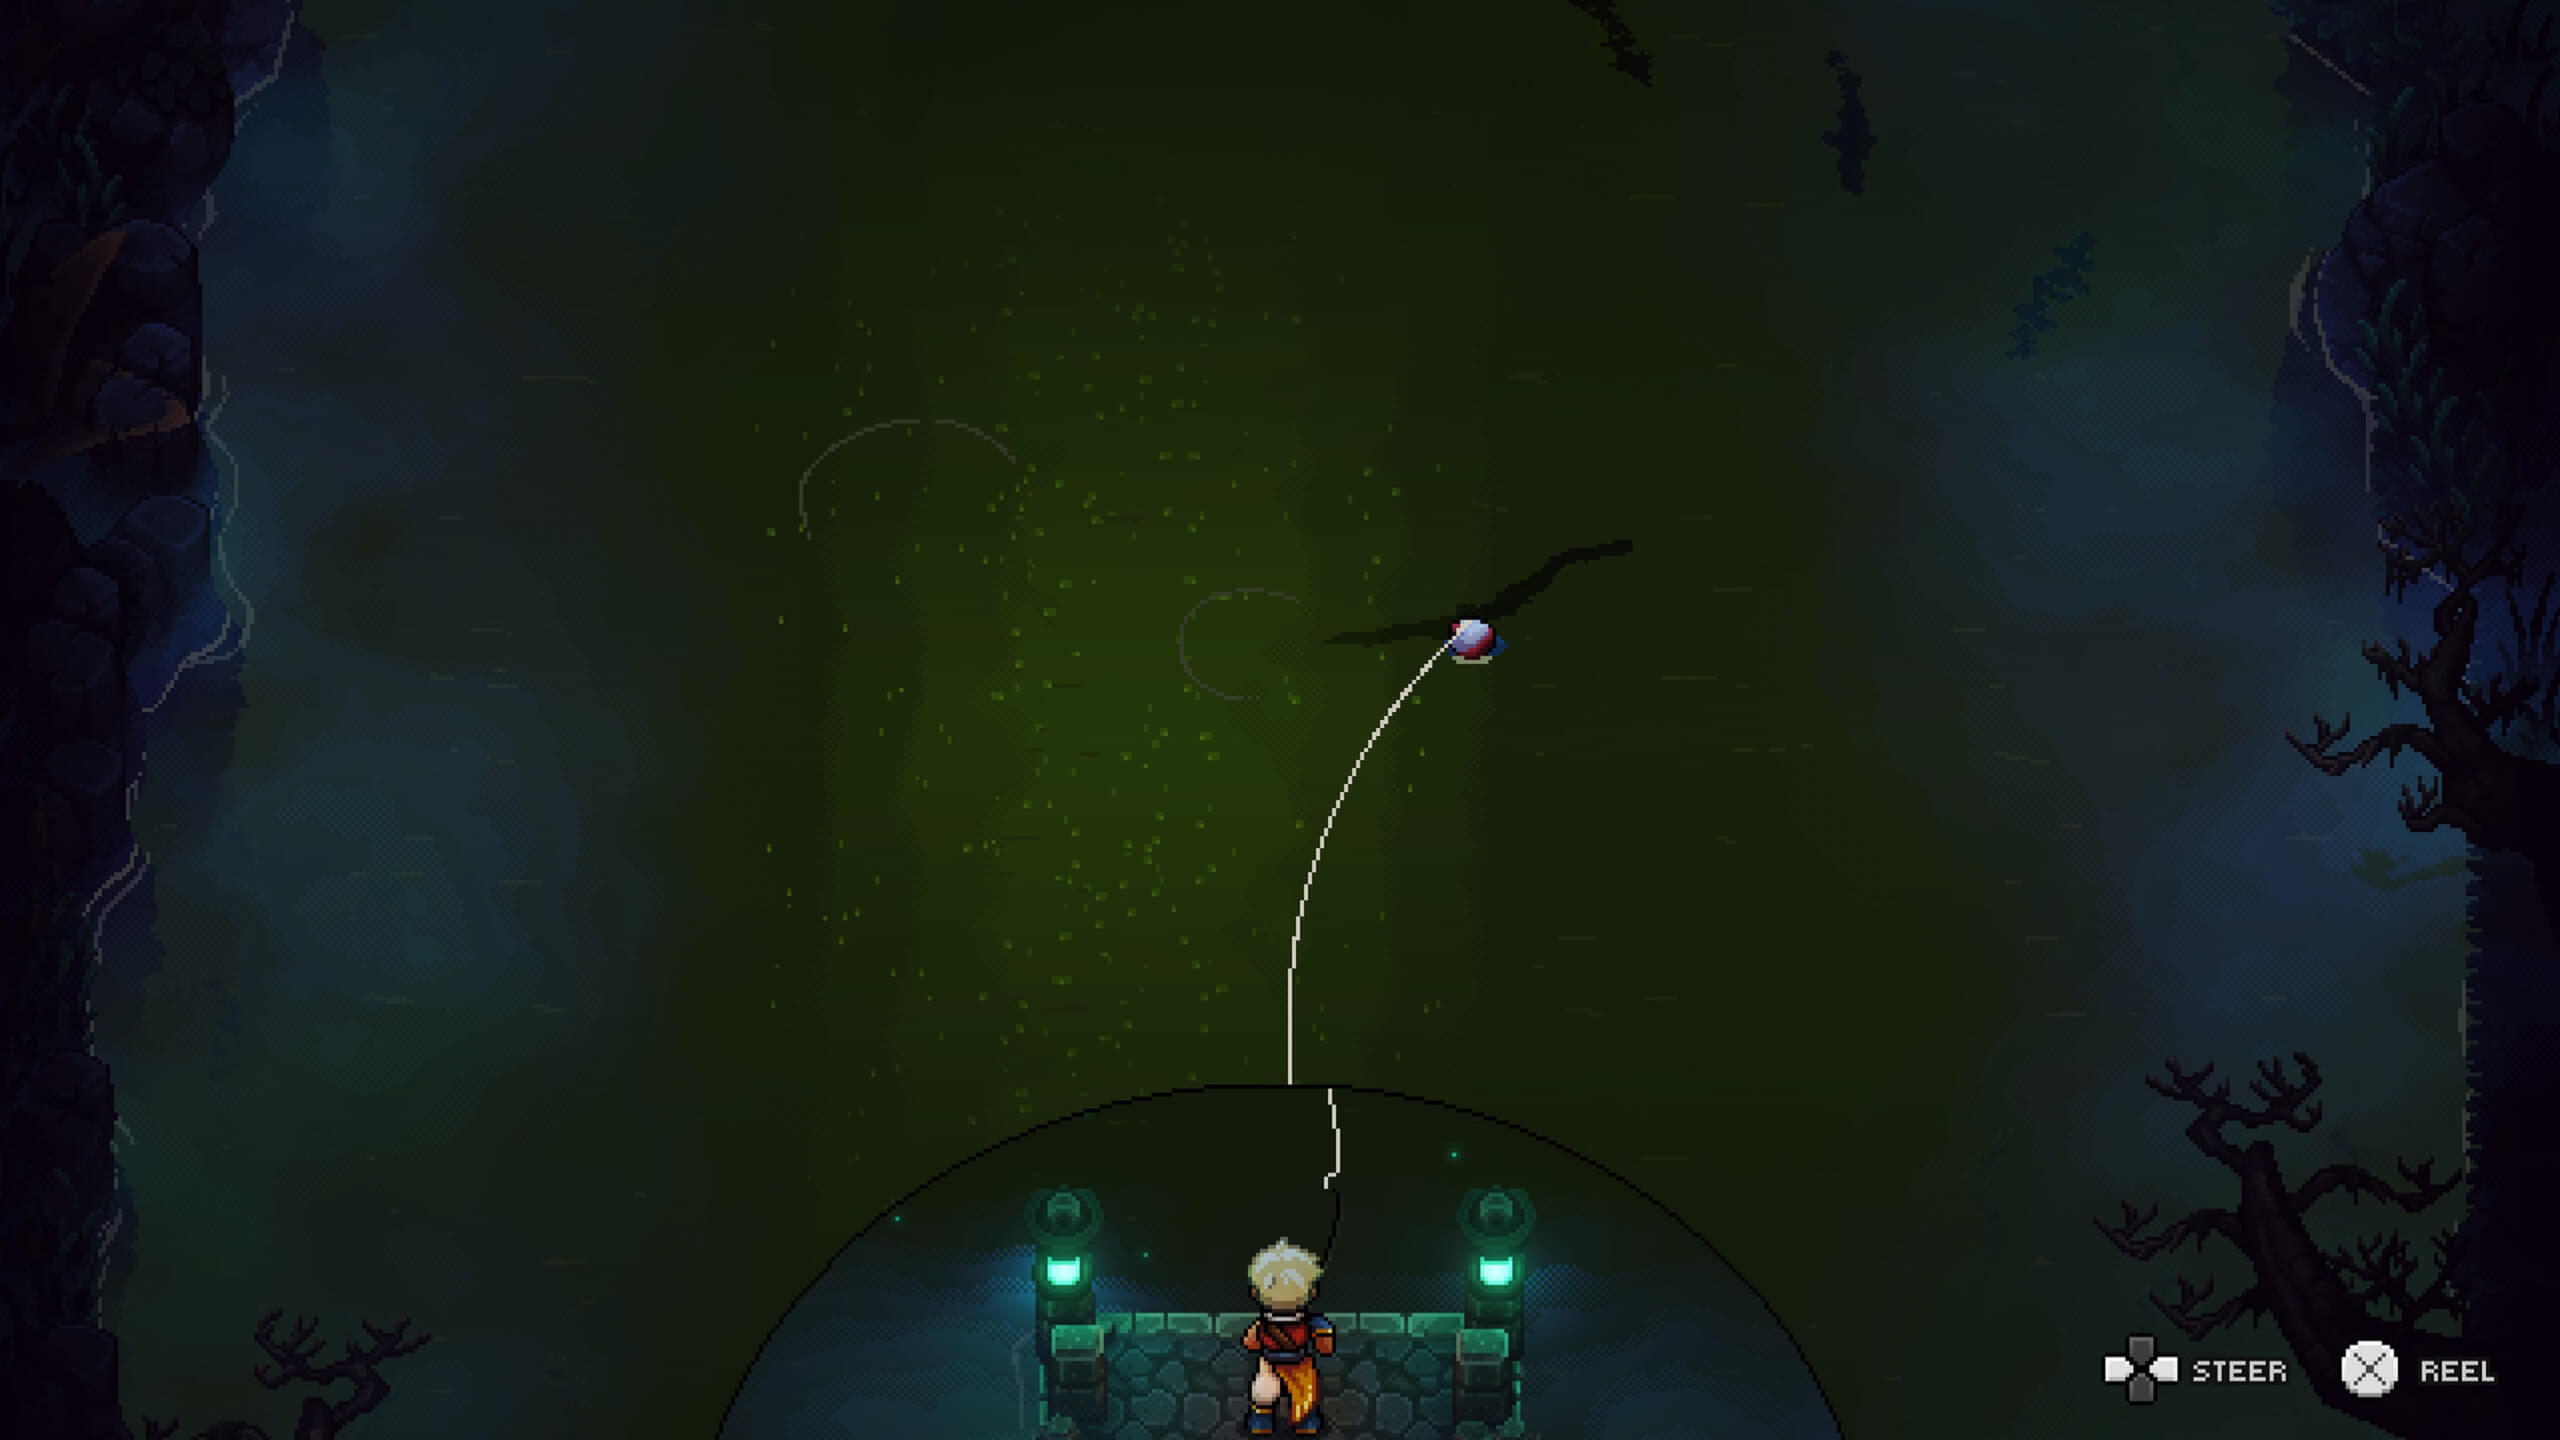 I am fishing at one of the small lake areas found in the game. I have nearly caught the long looking silhouette in the green lake.